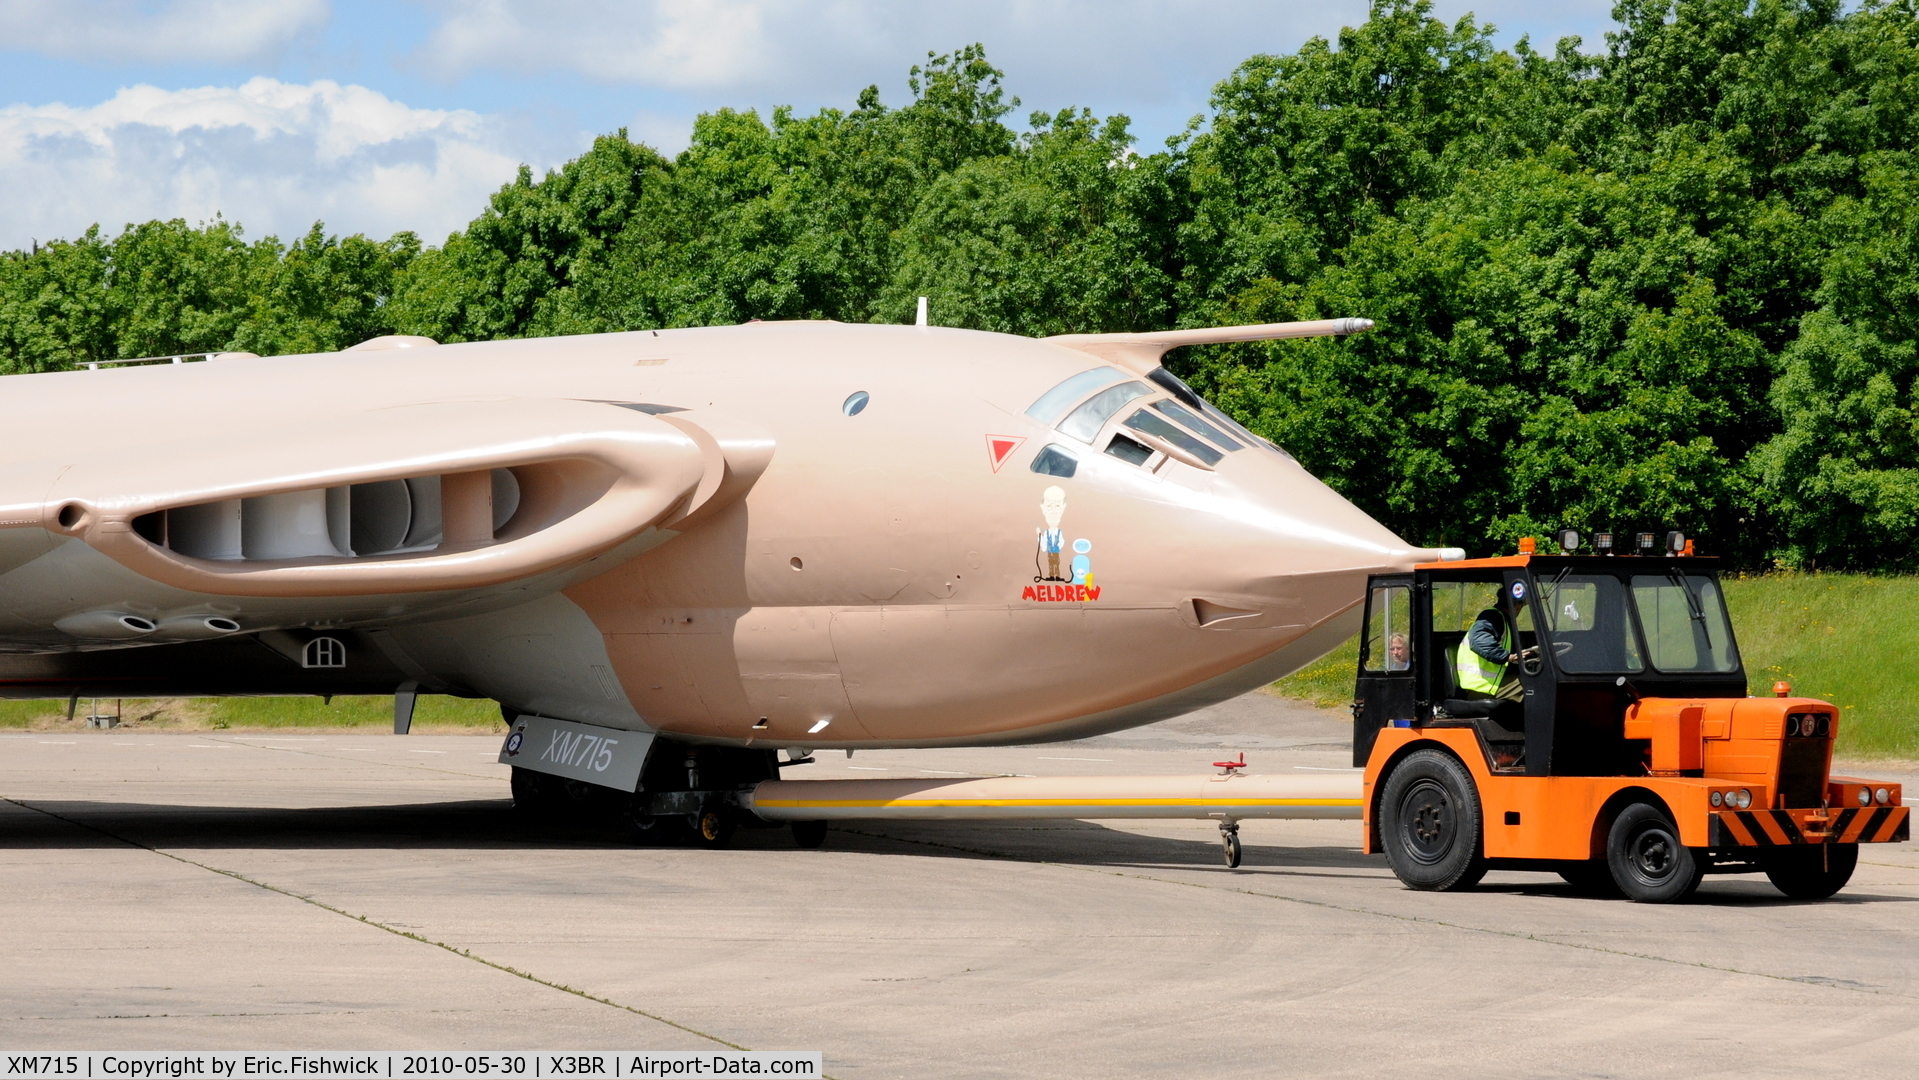 XM715, 1963 Handley Page Victor K.2 C/N HP80/83, XM715 at Bruntingthorpe Cold War Jets Open Day - May 2010